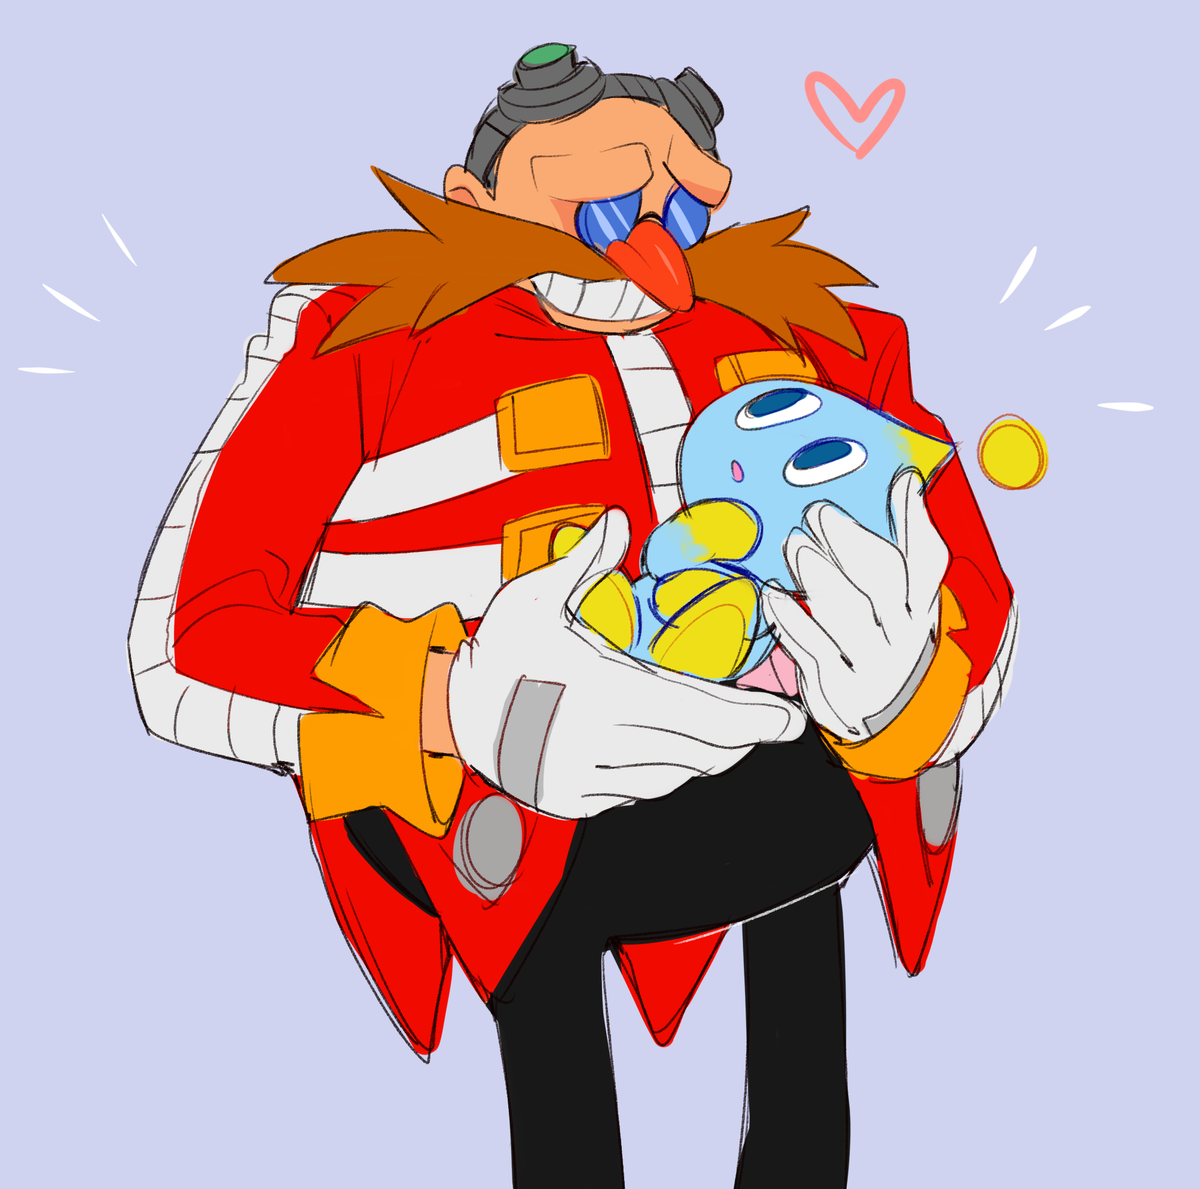 eggman is a great father figure.